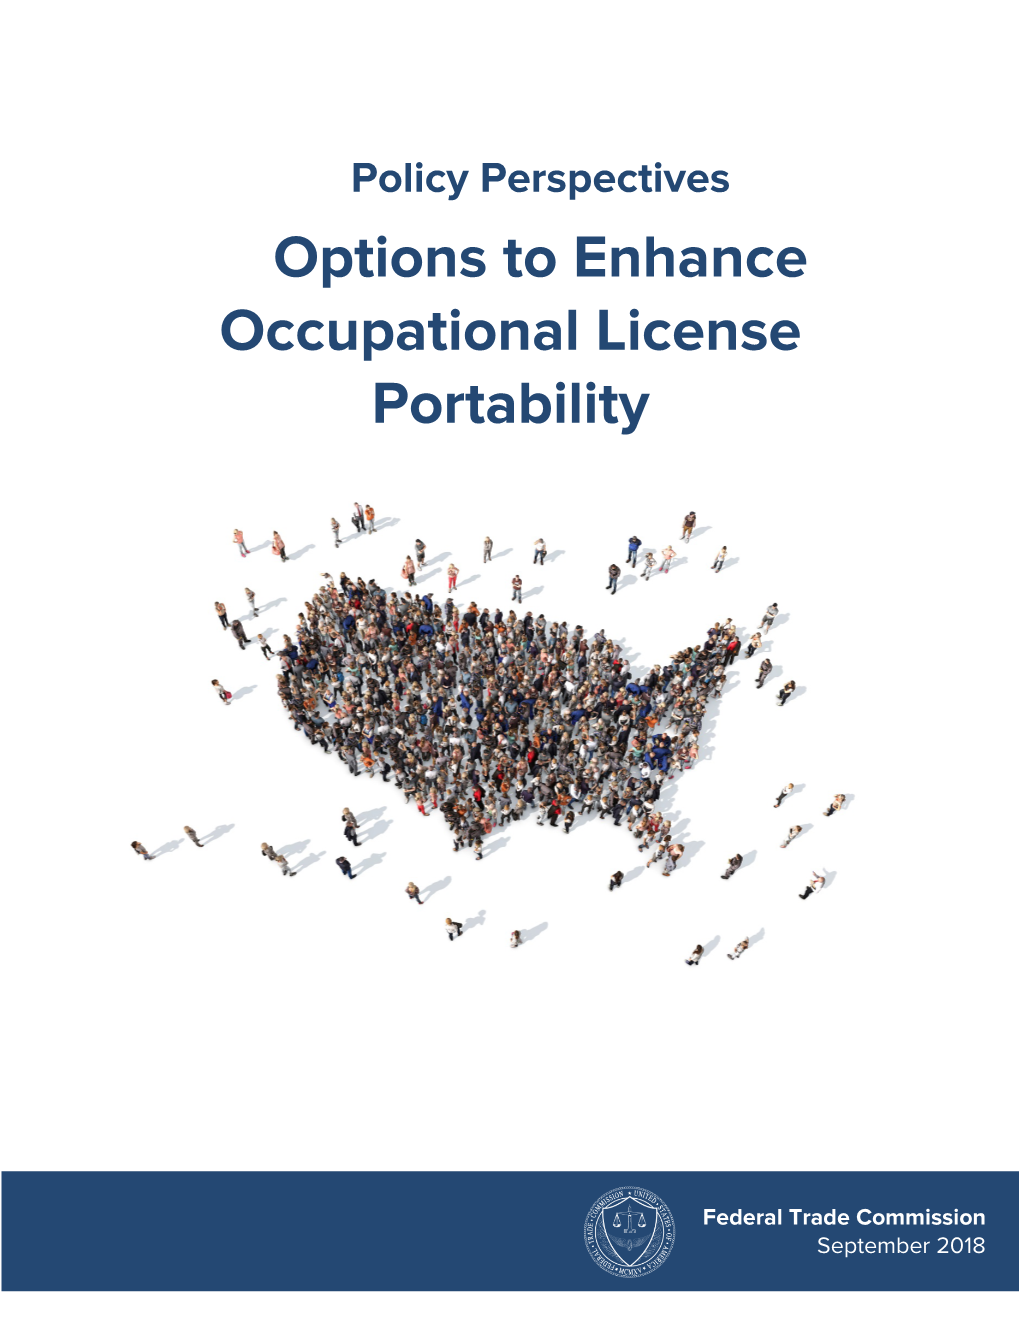 Policy Perspectives: Options to Enhance Occupational License Portability